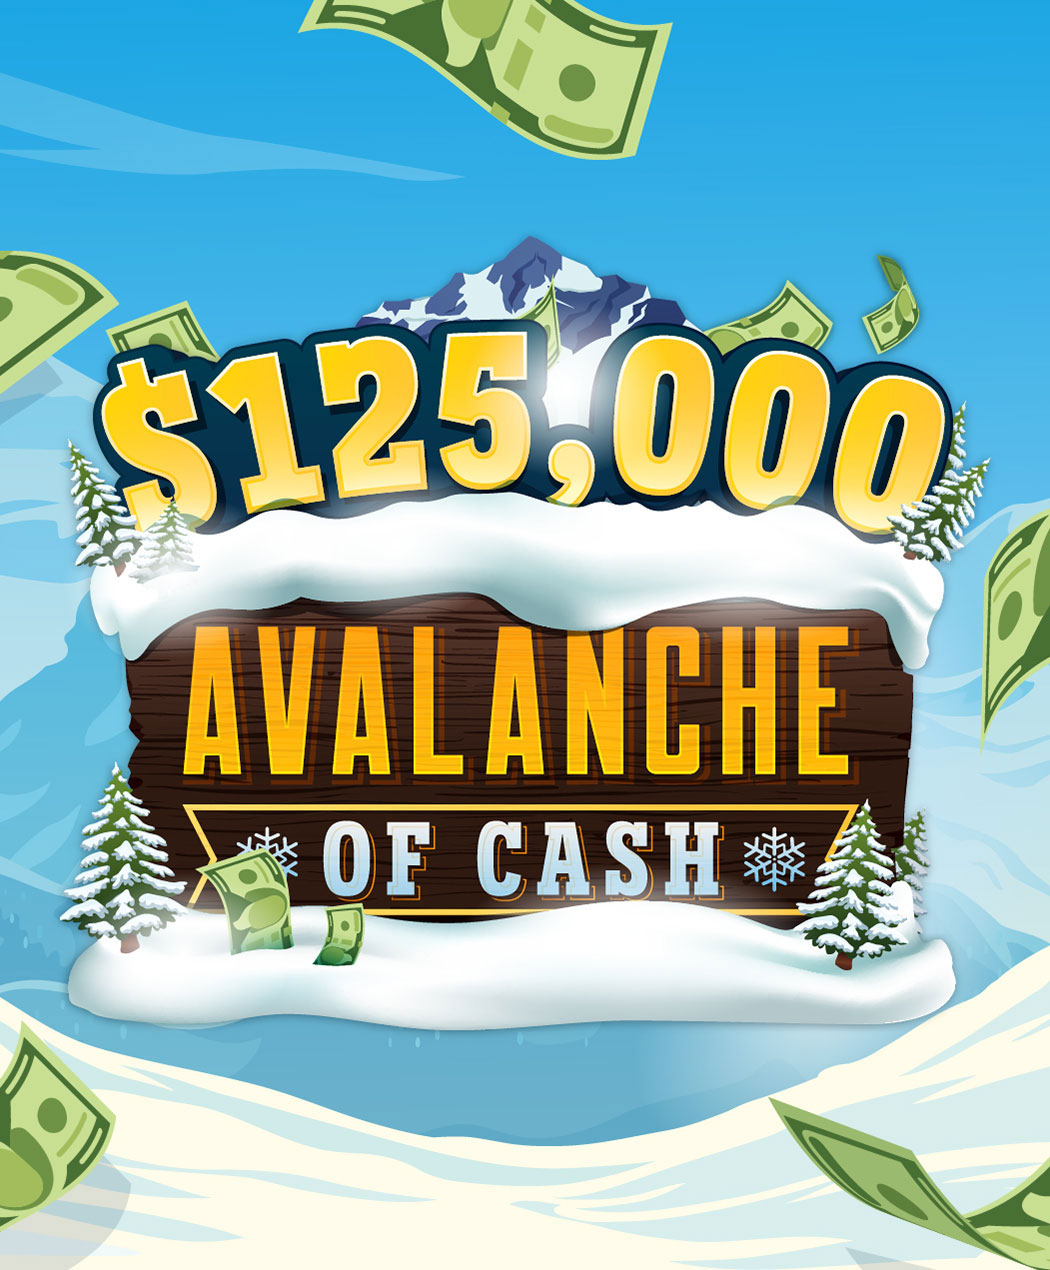 $125,000 Avalanche of Cash